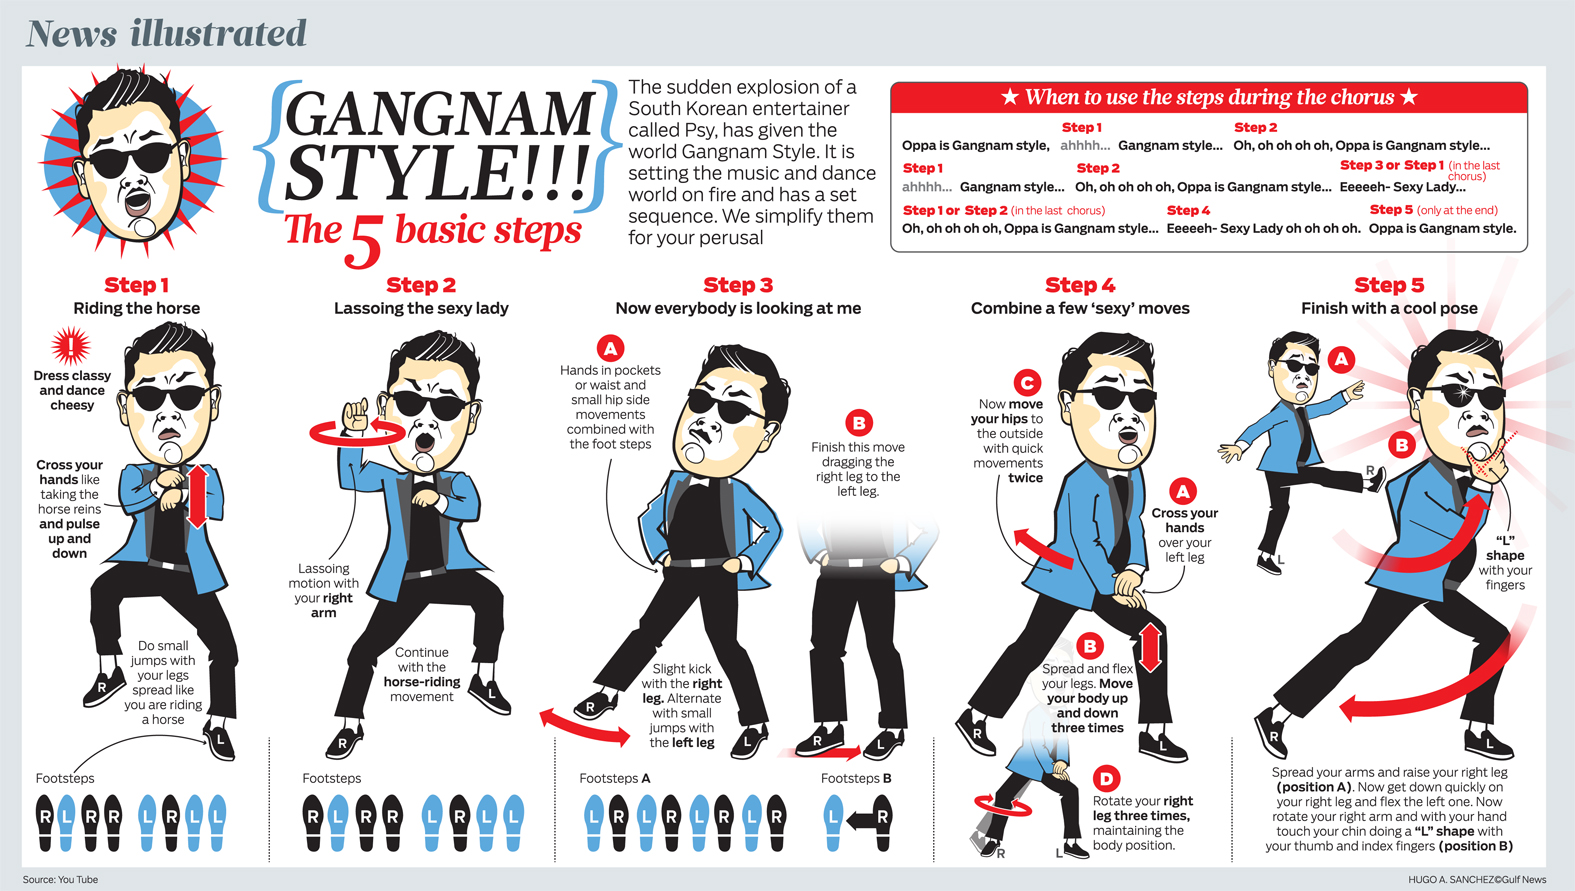 After More than a Billion Views, an Infographic Looks at Gangnam Style's Social Reach